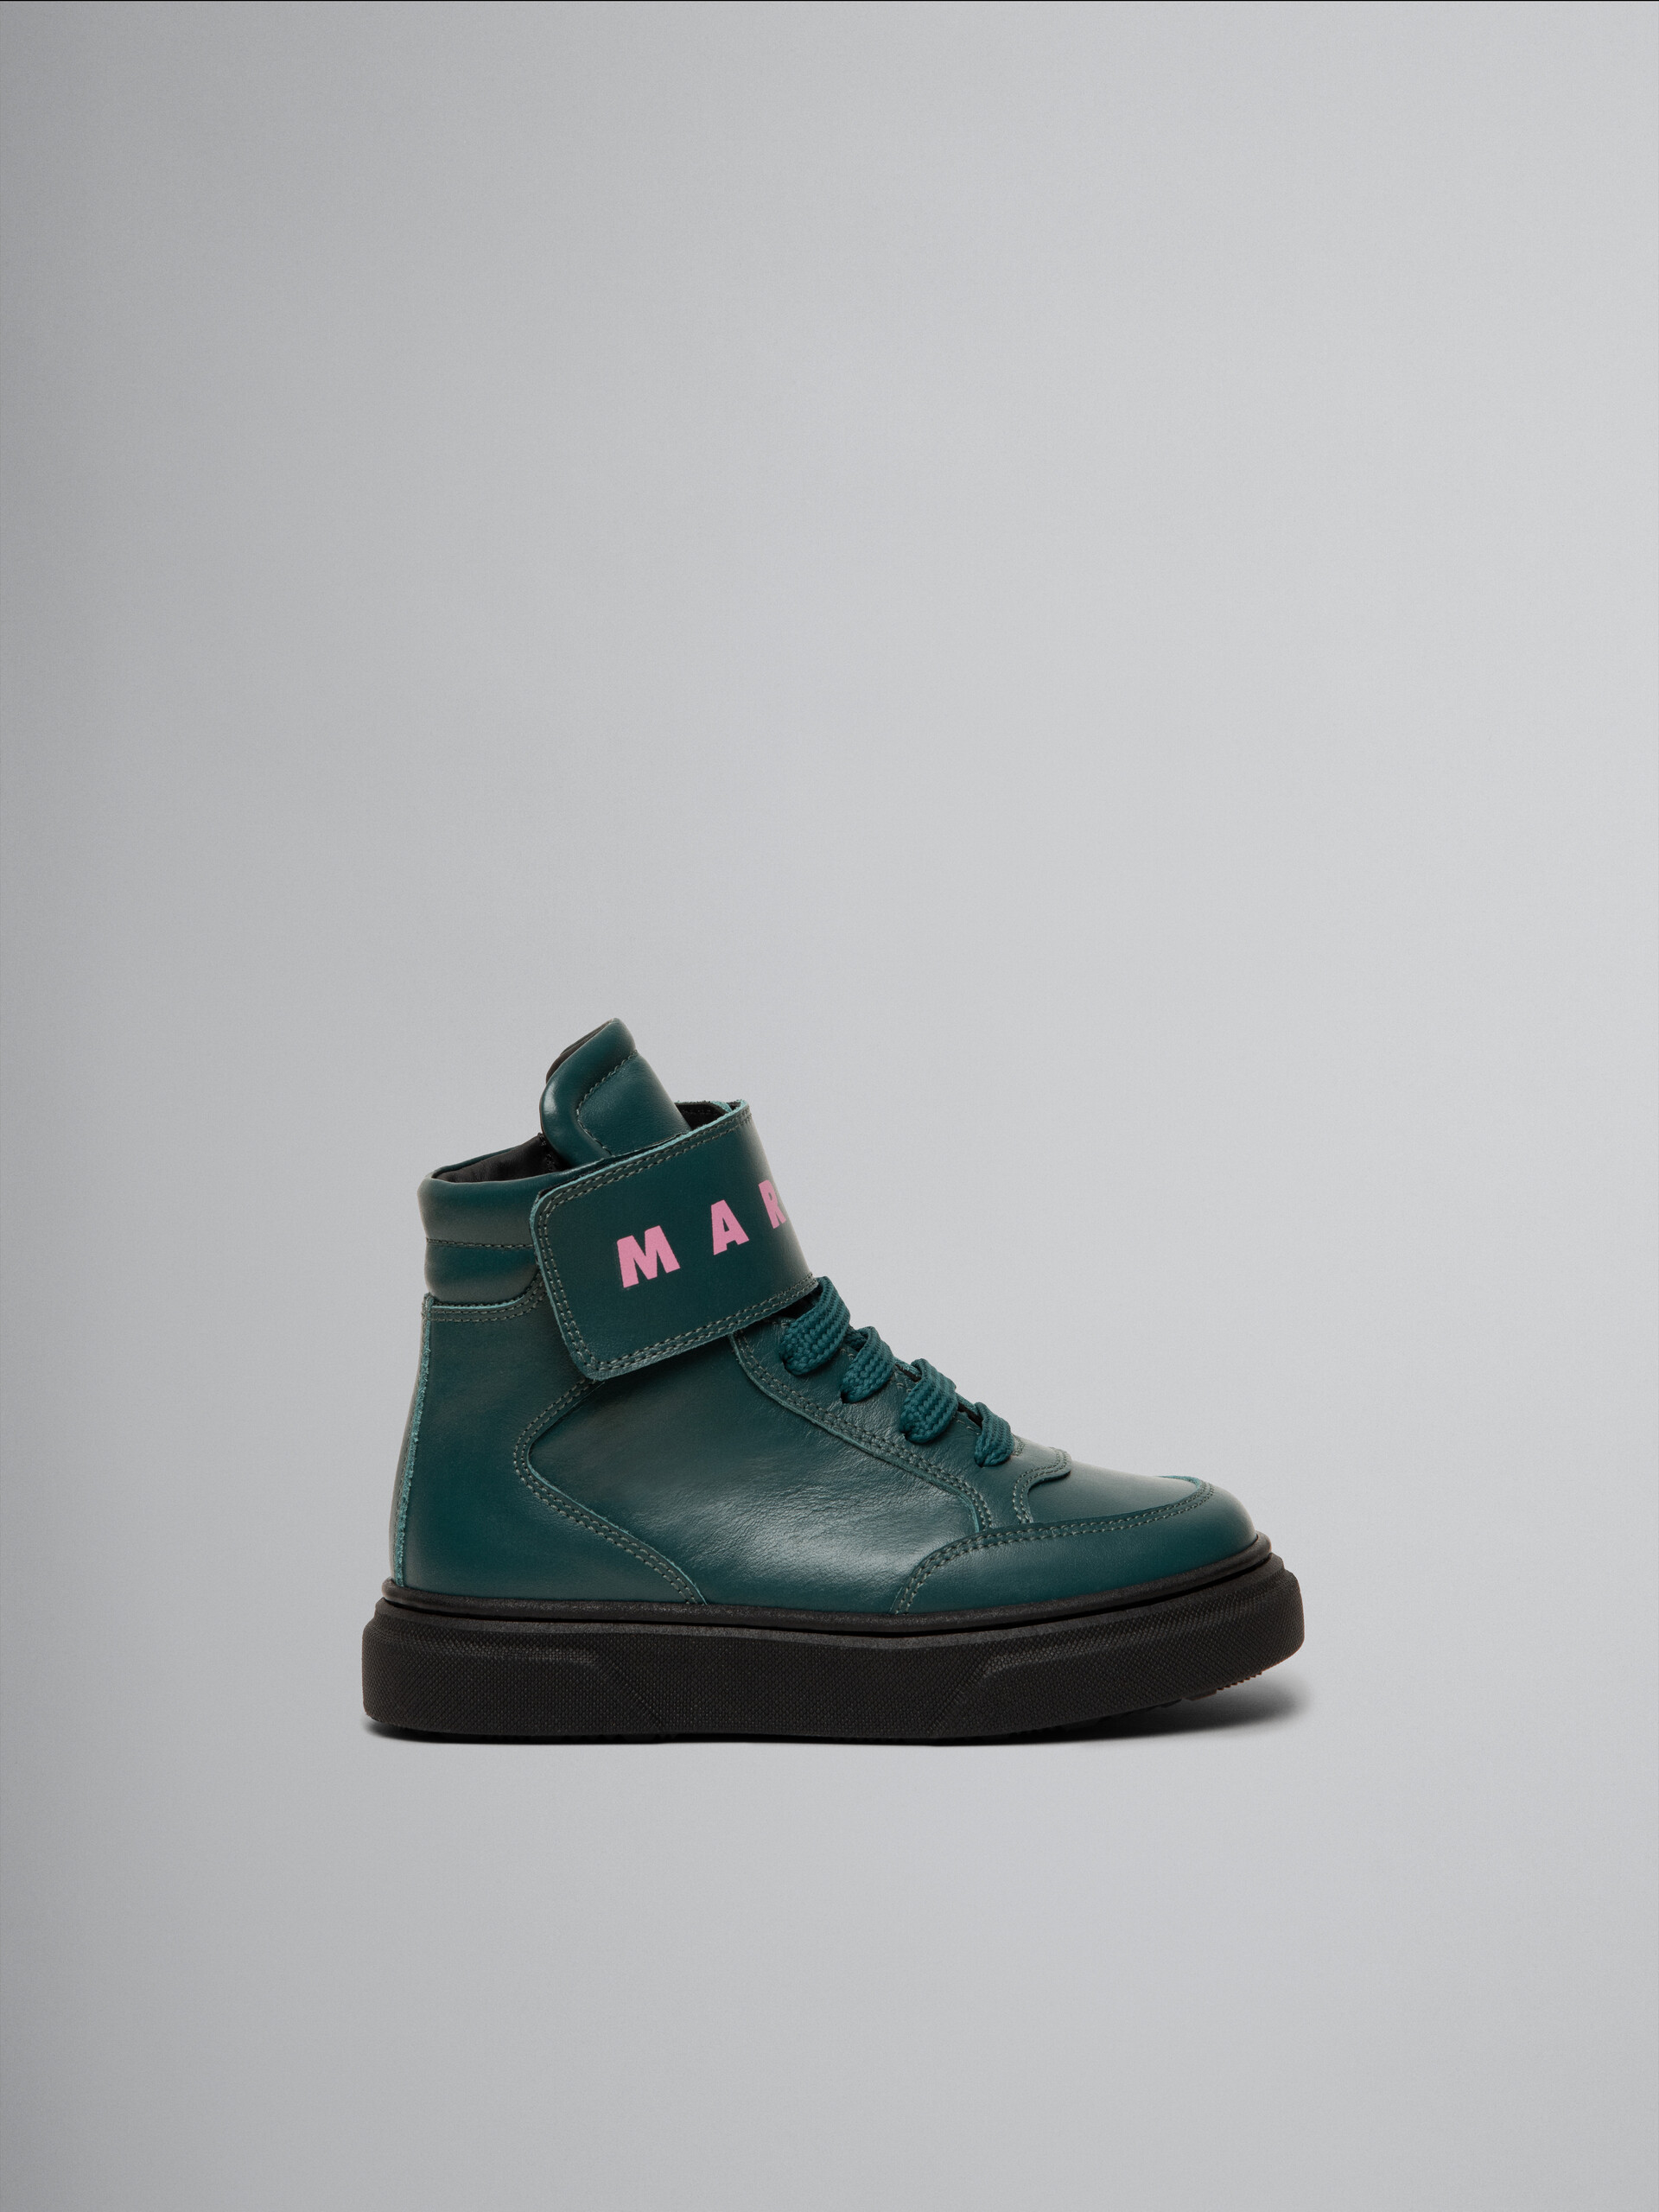 Green leather ankle boot with maxi strap - Other accessories - Image 1